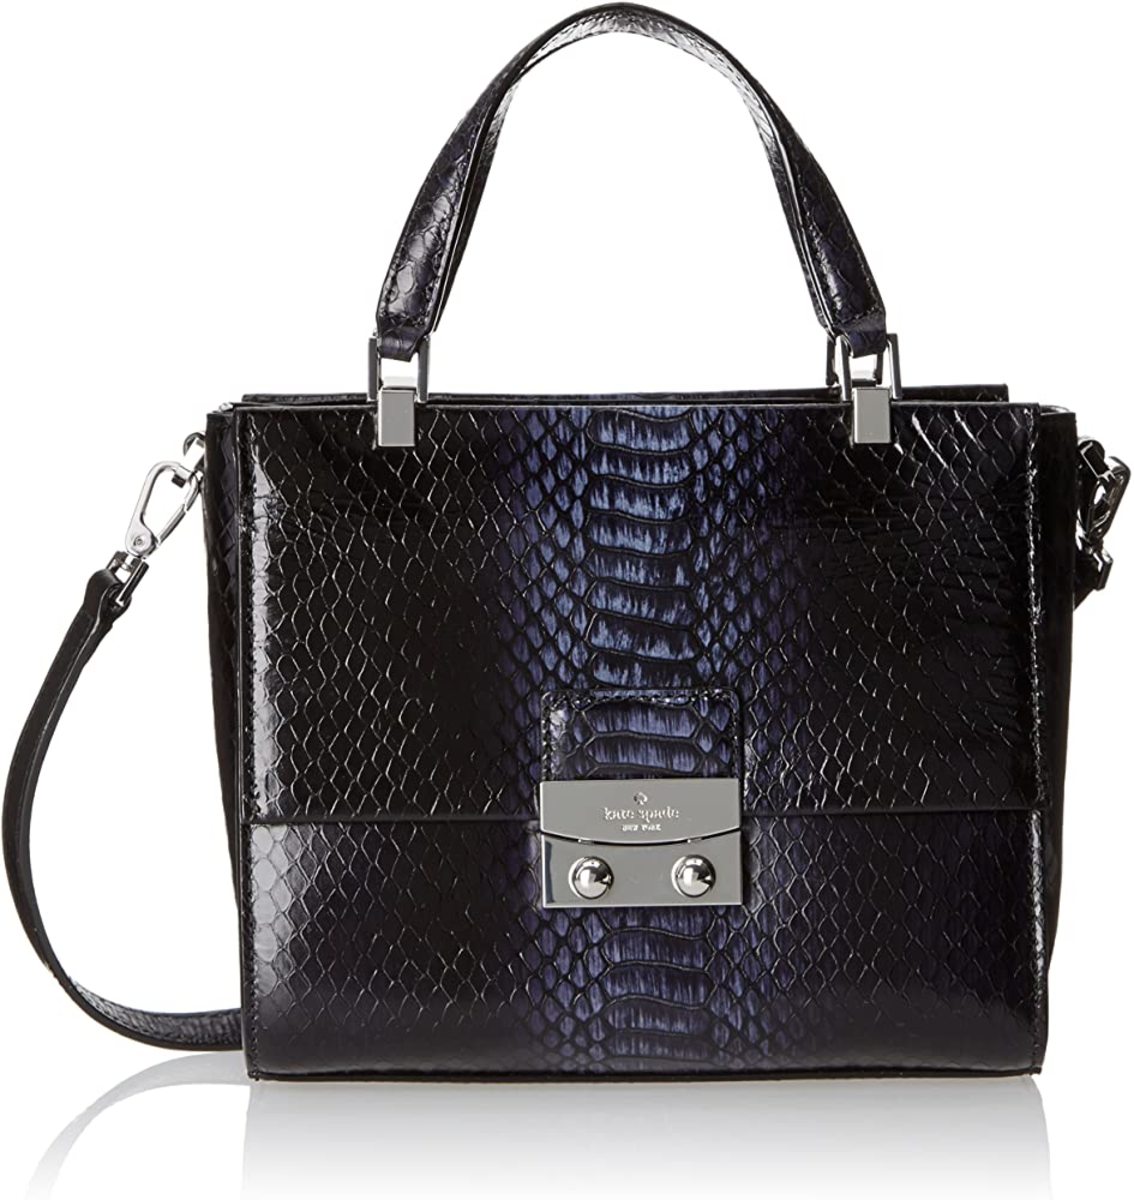 15 Most Adorable and Ergonomic Handbags for Women in 2022